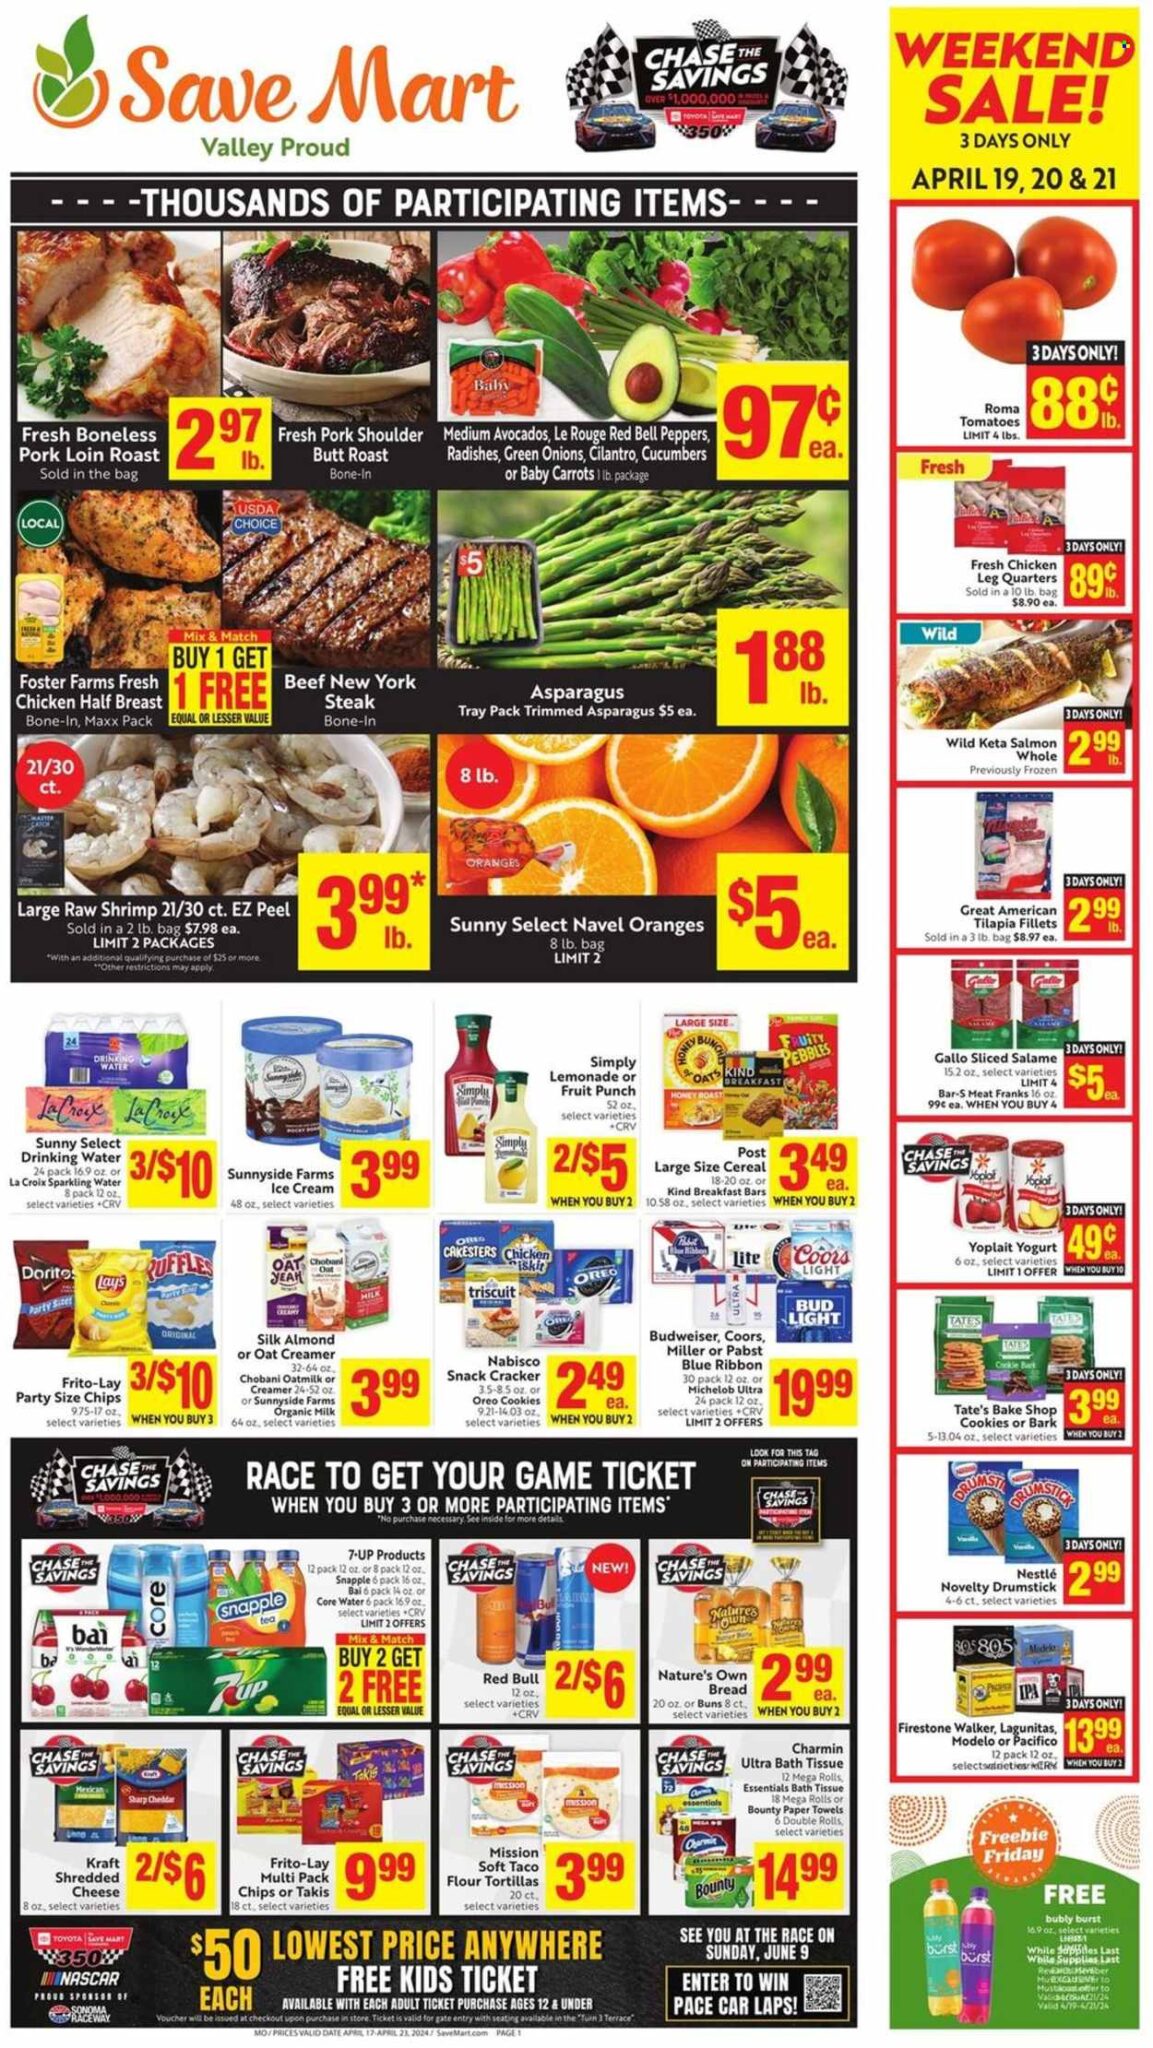 Save Mart Weekly Flyer